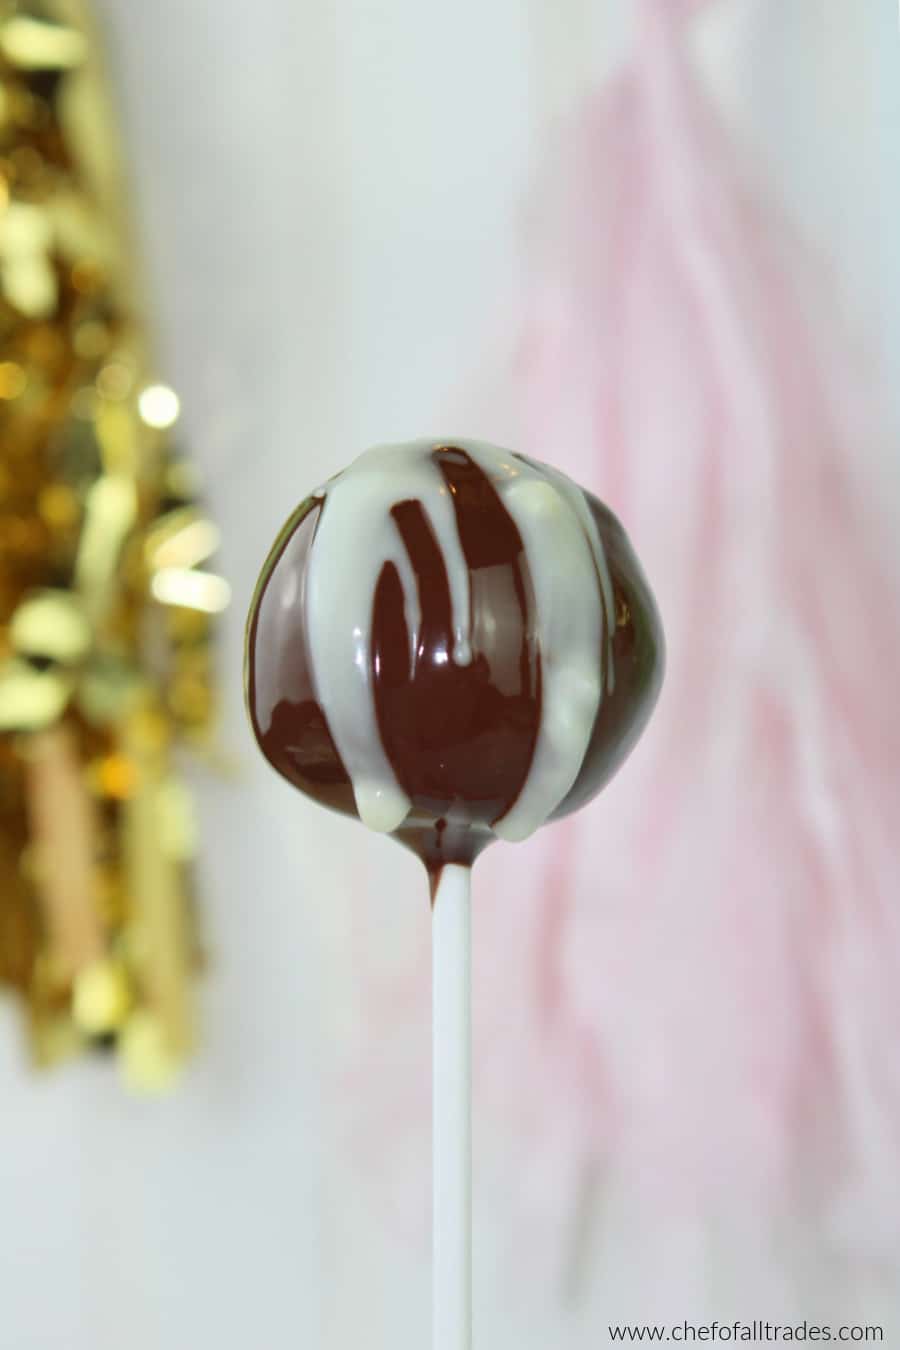 Cake pop against white background with party decorations